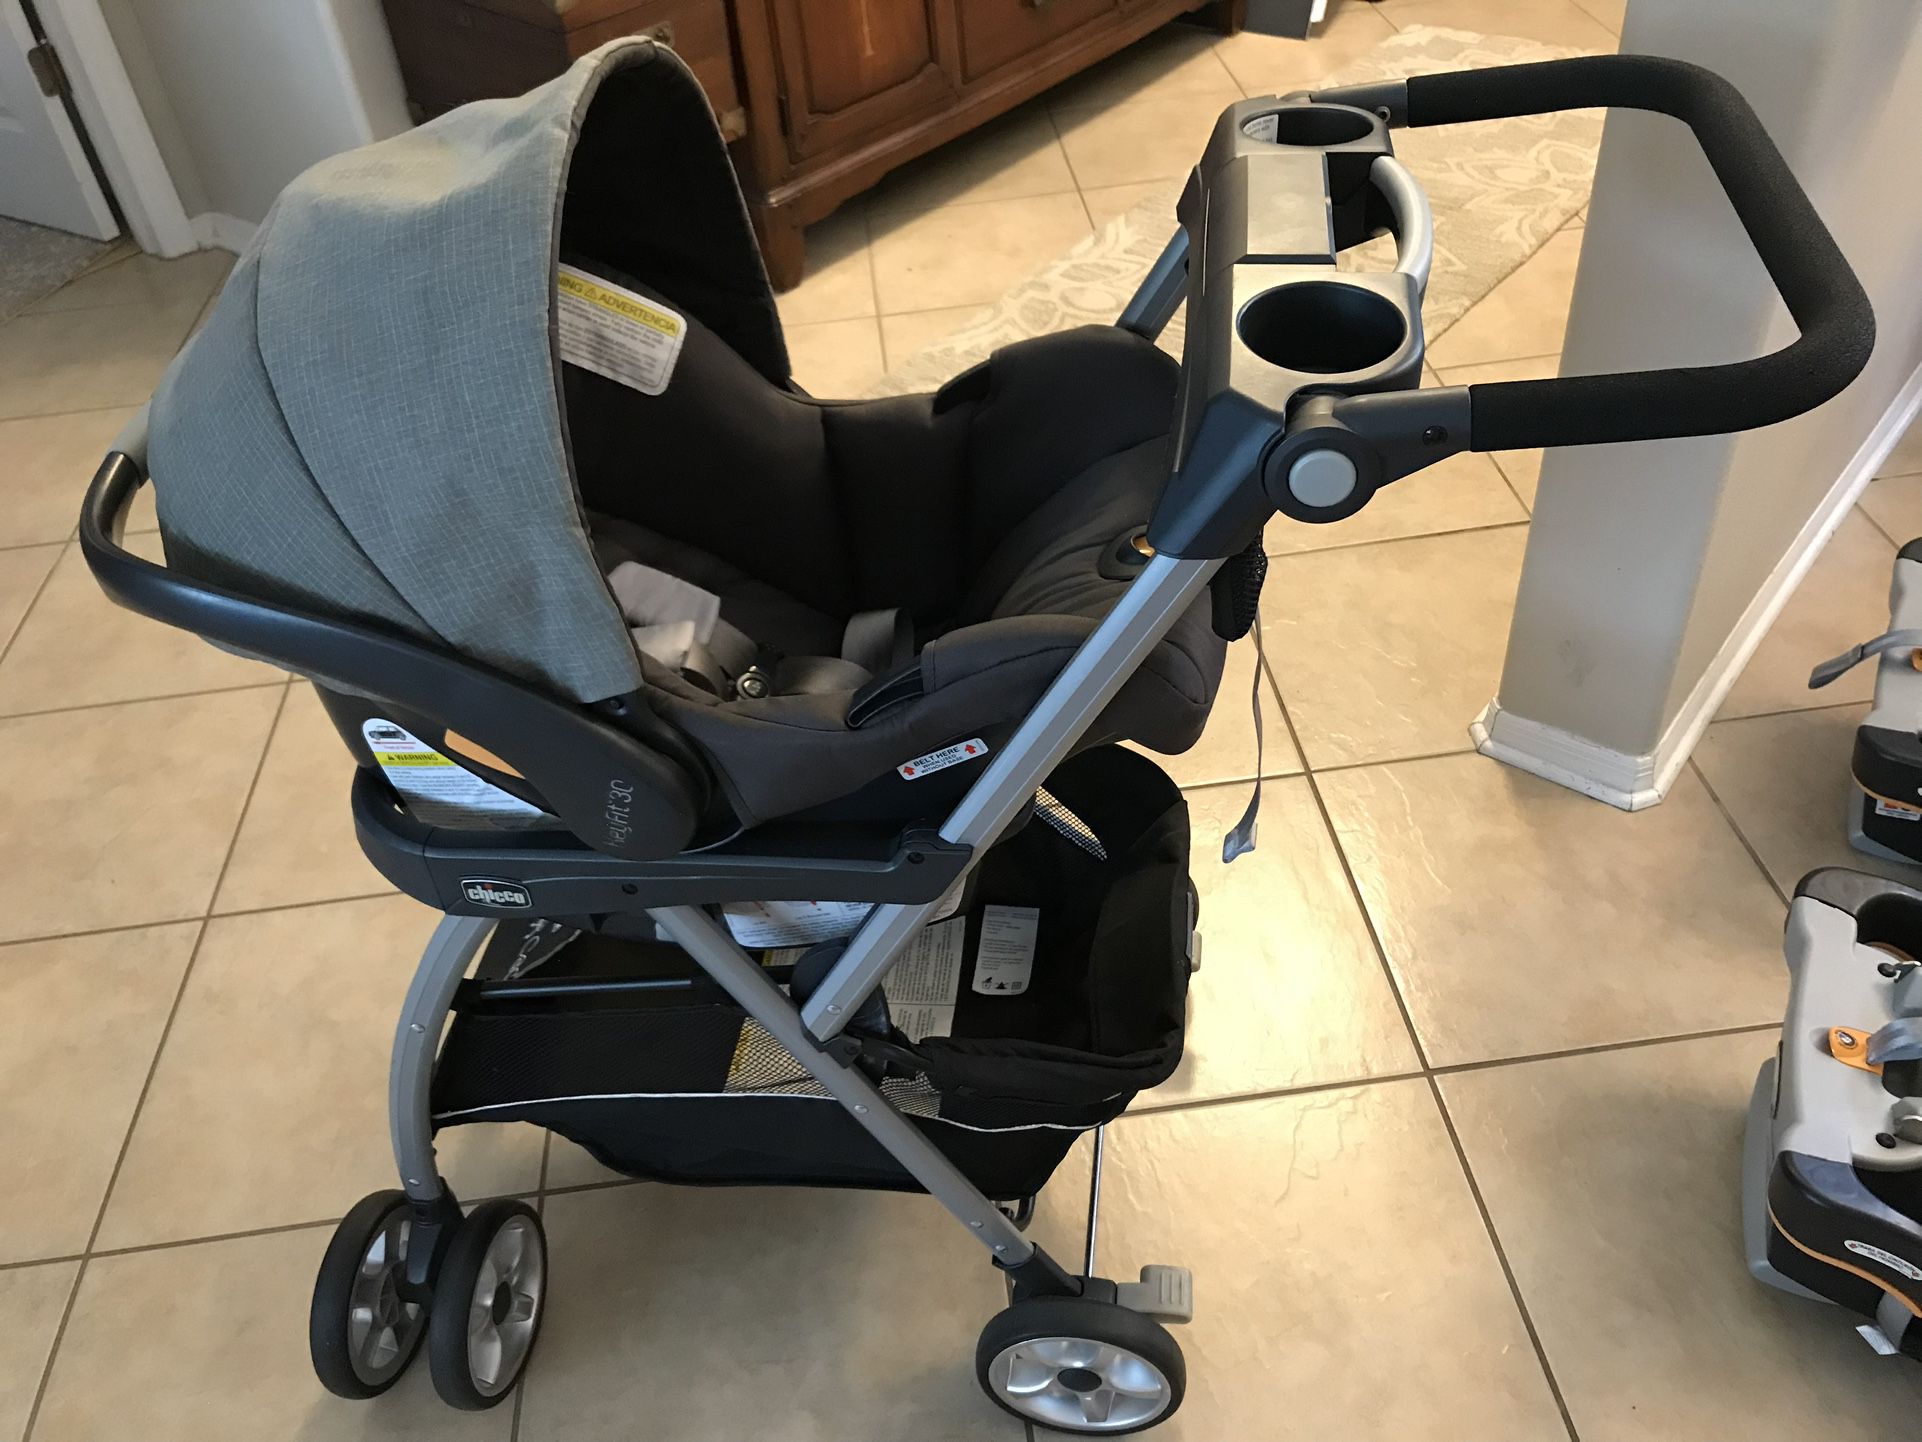 Chicco Car Seat With Caddy